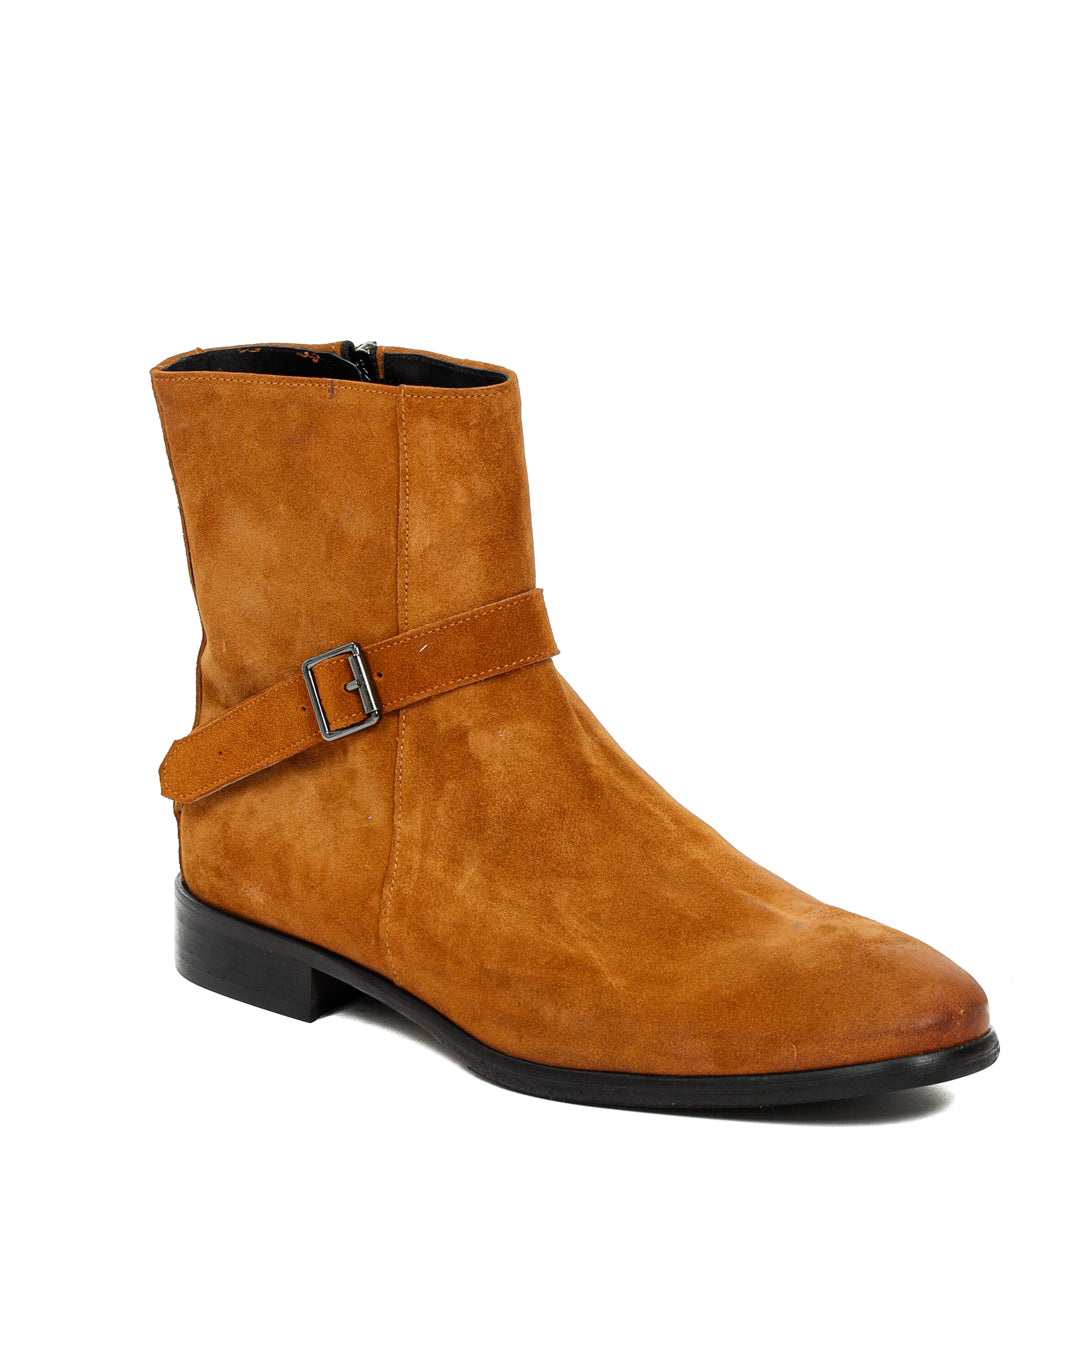 Neil - terra suede ankle boot with strap